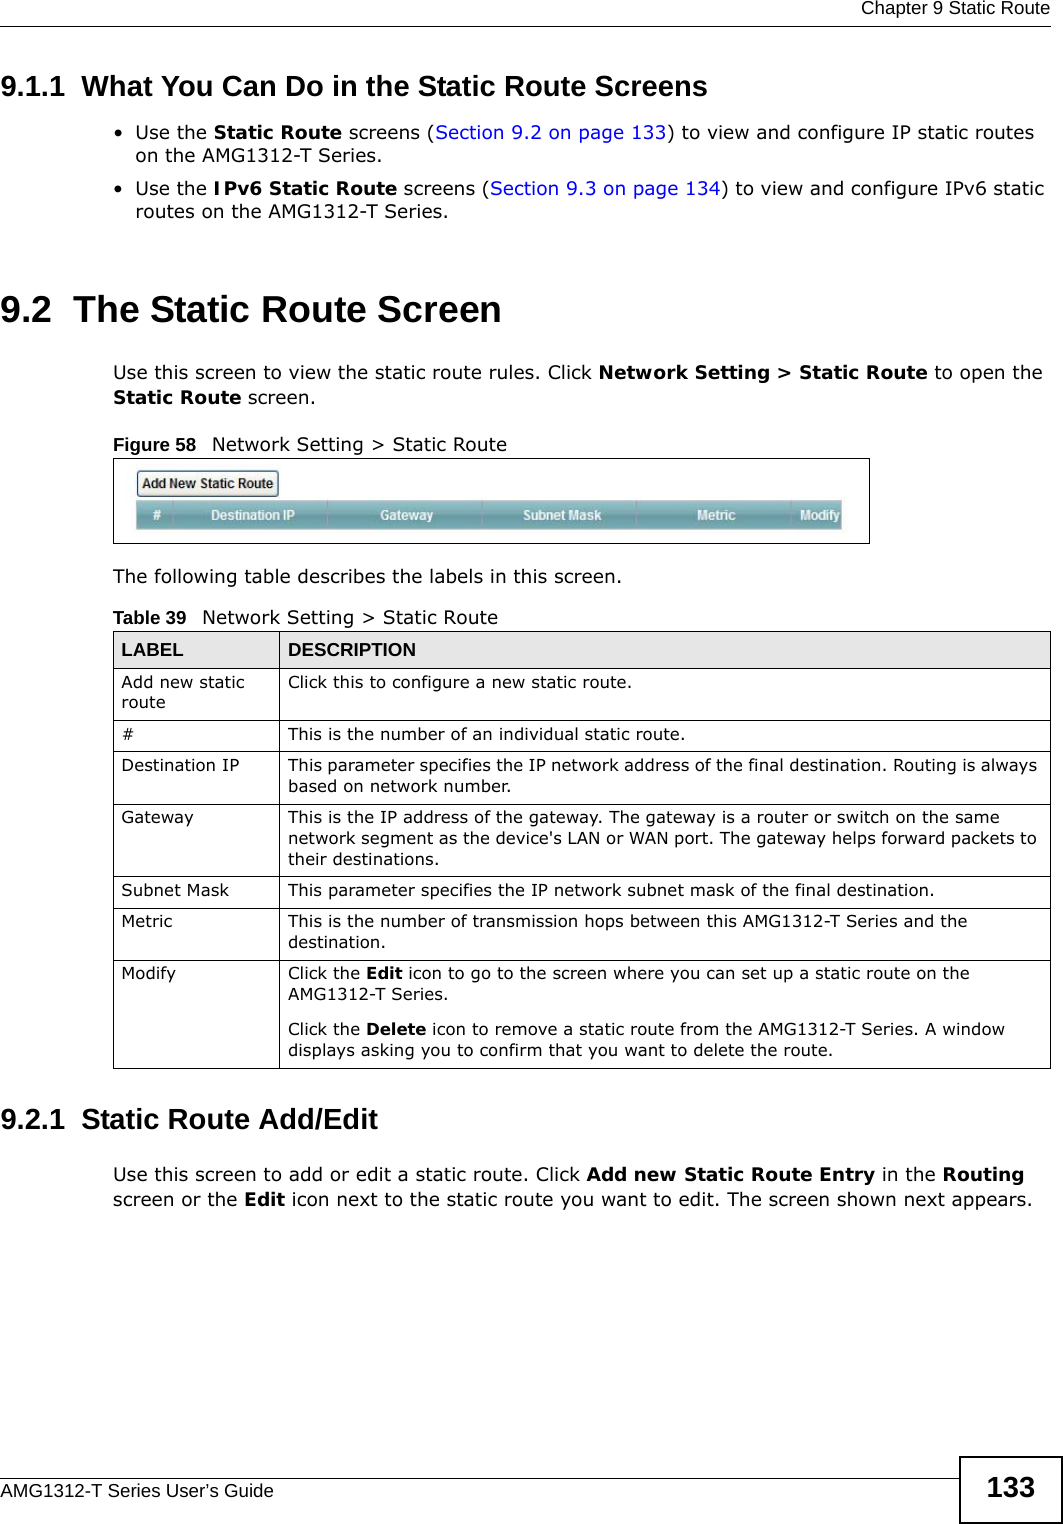  Chapter 9 Static RouteAMG1312-T Series User’s Guide 1339.1.1  What You Can Do in the Static Route Screens•Use the Static Route screens (Section 9.2 on page 133) to view and configure IP static routes on the AMG1312-T Series.•Use the IPv6 Static Route screens (Section 9.3 on page 134) to view and configure IPv6 static routes on the AMG1312-T Series.9.2  The Static Route ScreenUse this screen to view the static route rules. Click Network Setting &gt; Static Route to open the Static Route screen.Figure 58   Network Setting &gt; Static RouteThe following table describes the labels in this screen. 9.2.1  Static Route Add/Edit   Use this screen to add or edit a static route. Click Add new Static Route Entry in the Routing screen or the Edit icon next to the static route you want to edit. The screen shown next appears.Table 39   Network Setting &gt; Static RouteLABEL DESCRIPTIONAdd new static routeClick this to configure a new static route.#This is the number of an individual static route.Destination IP This parameter specifies the IP network address of the final destination. Routing is always based on network number. Gateway This is the IP address of the gateway. The gateway is a router or switch on the same network segment as the device&apos;s LAN or WAN port. The gateway helps forward packets to their destinations.Subnet Mask This parameter specifies the IP network subnet mask of the final destination.Metric This is the number of transmission hops between this AMG1312-T Series and the destination.Modify Click the Edit icon to go to the screen where you can set up a static route on the AMG1312-T Series.Click the Delete icon to remove a static route from the AMG1312-T Series. A window displays asking you to confirm that you want to delete the route. 